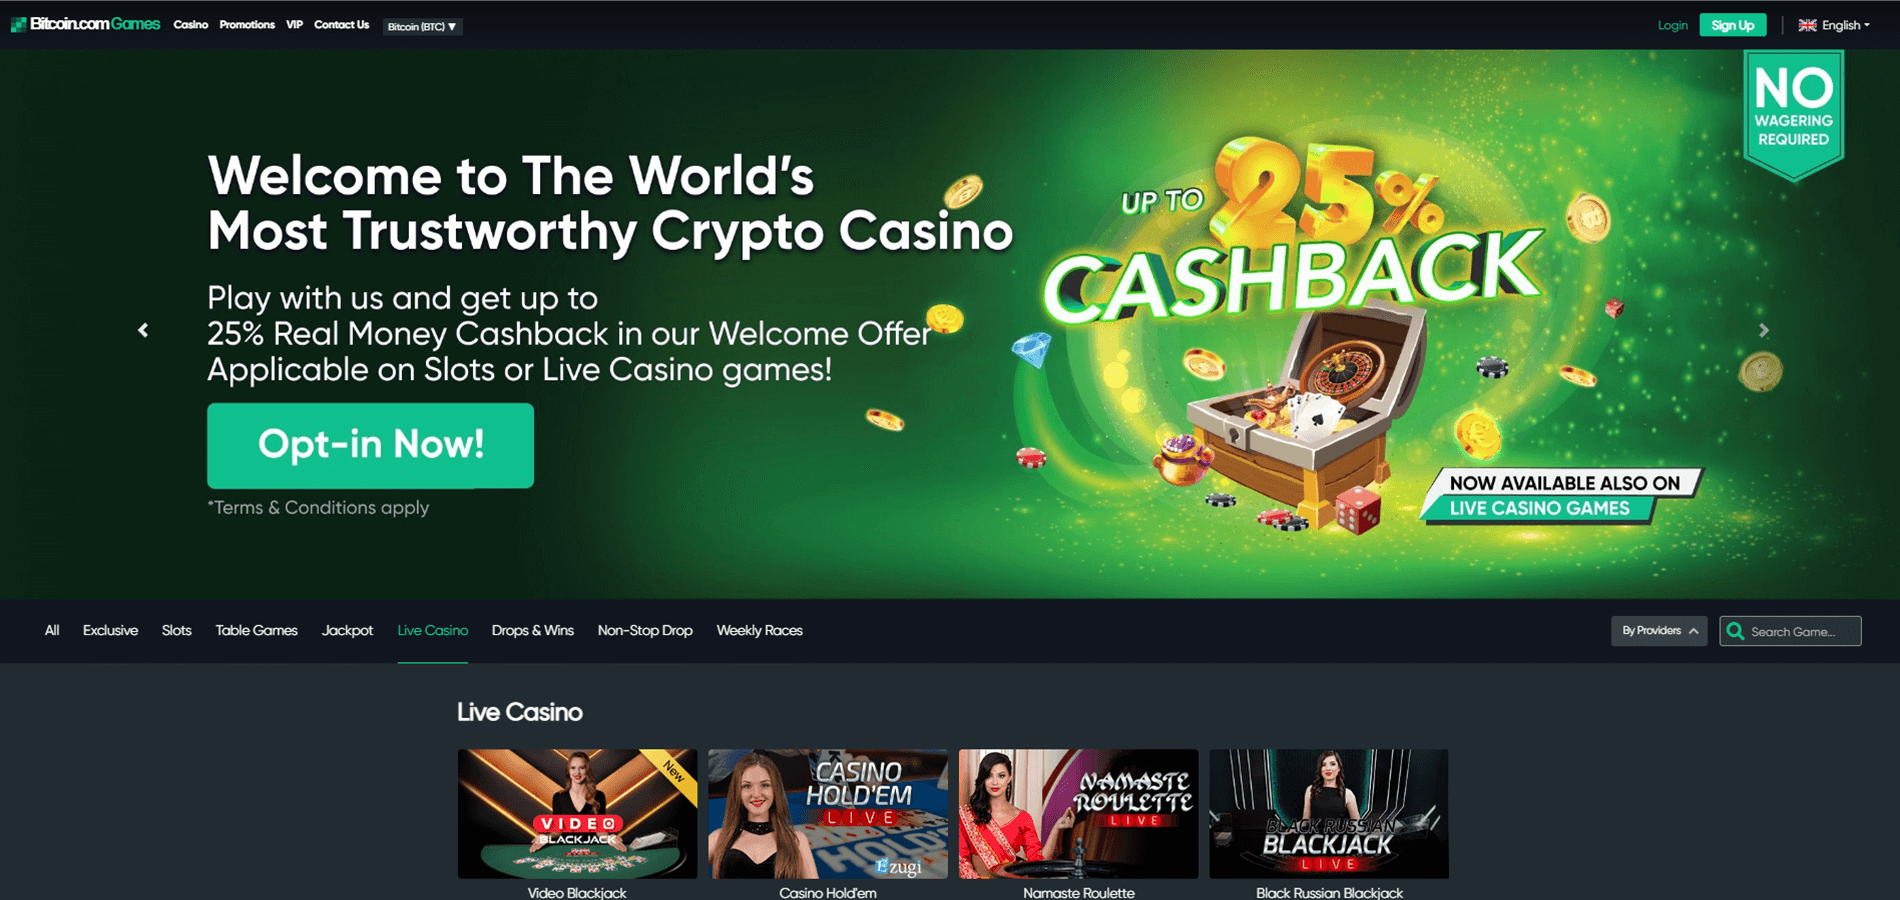 Online Casinos Join the Streaming Wars With Live Dealers